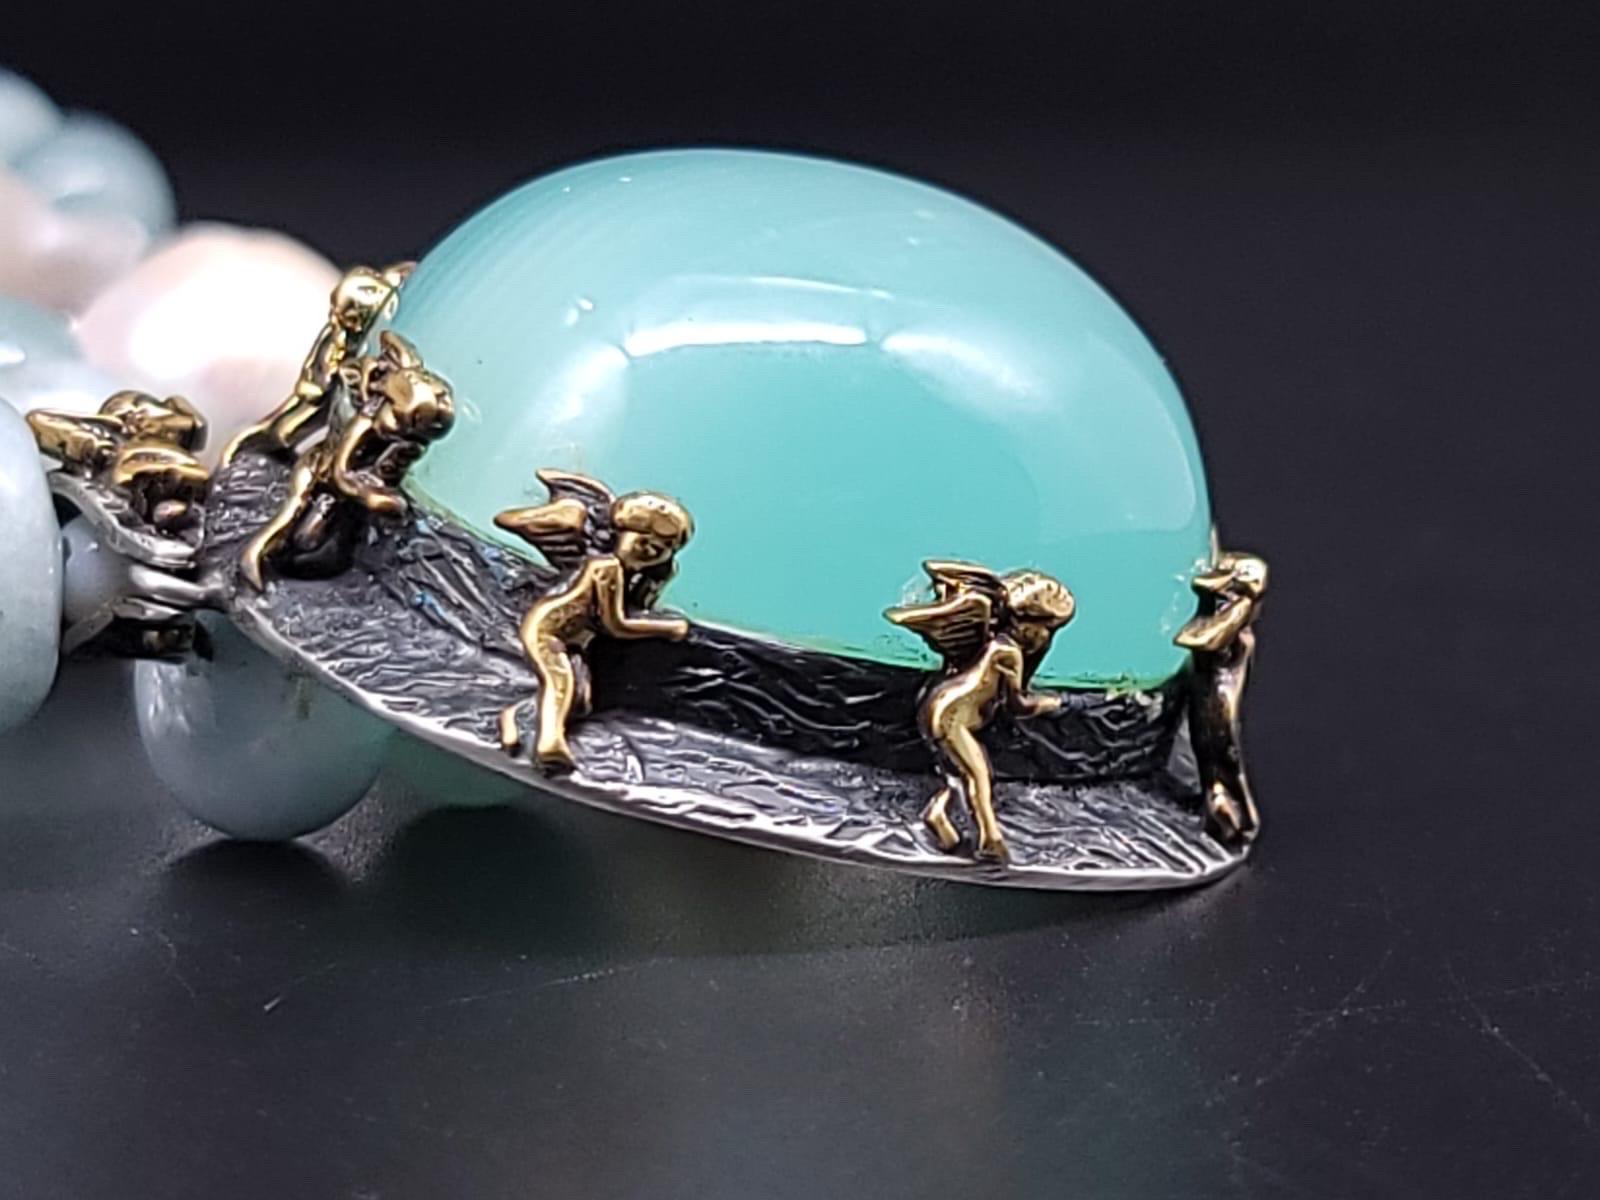 A.Jeschel Massive Aquamarine Pendant suspended from Baroque Pearl Necklace For Sale 2